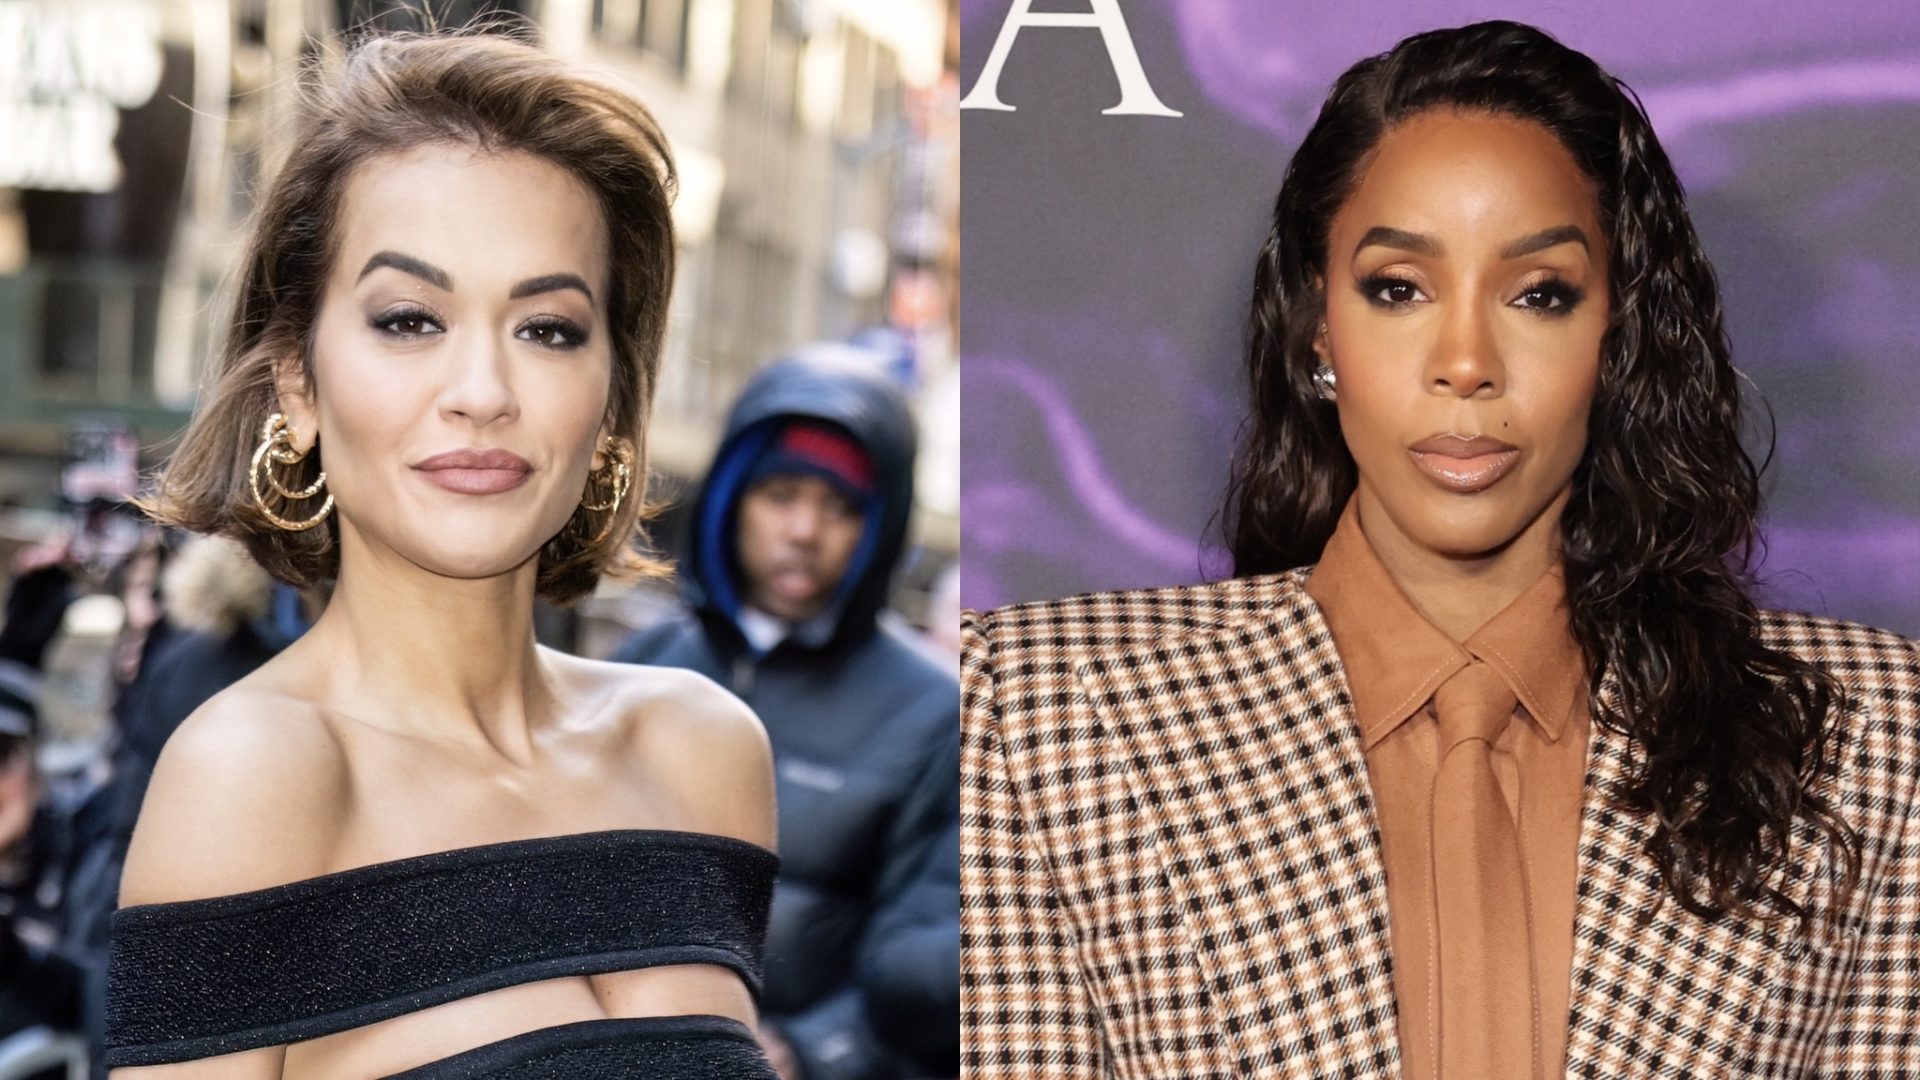 Oop! Rita Ora Seemingly Confirms Co-Hosting ‘TODAY’ Show After Kelly Rowland Reportedly Backed Out Last Minute